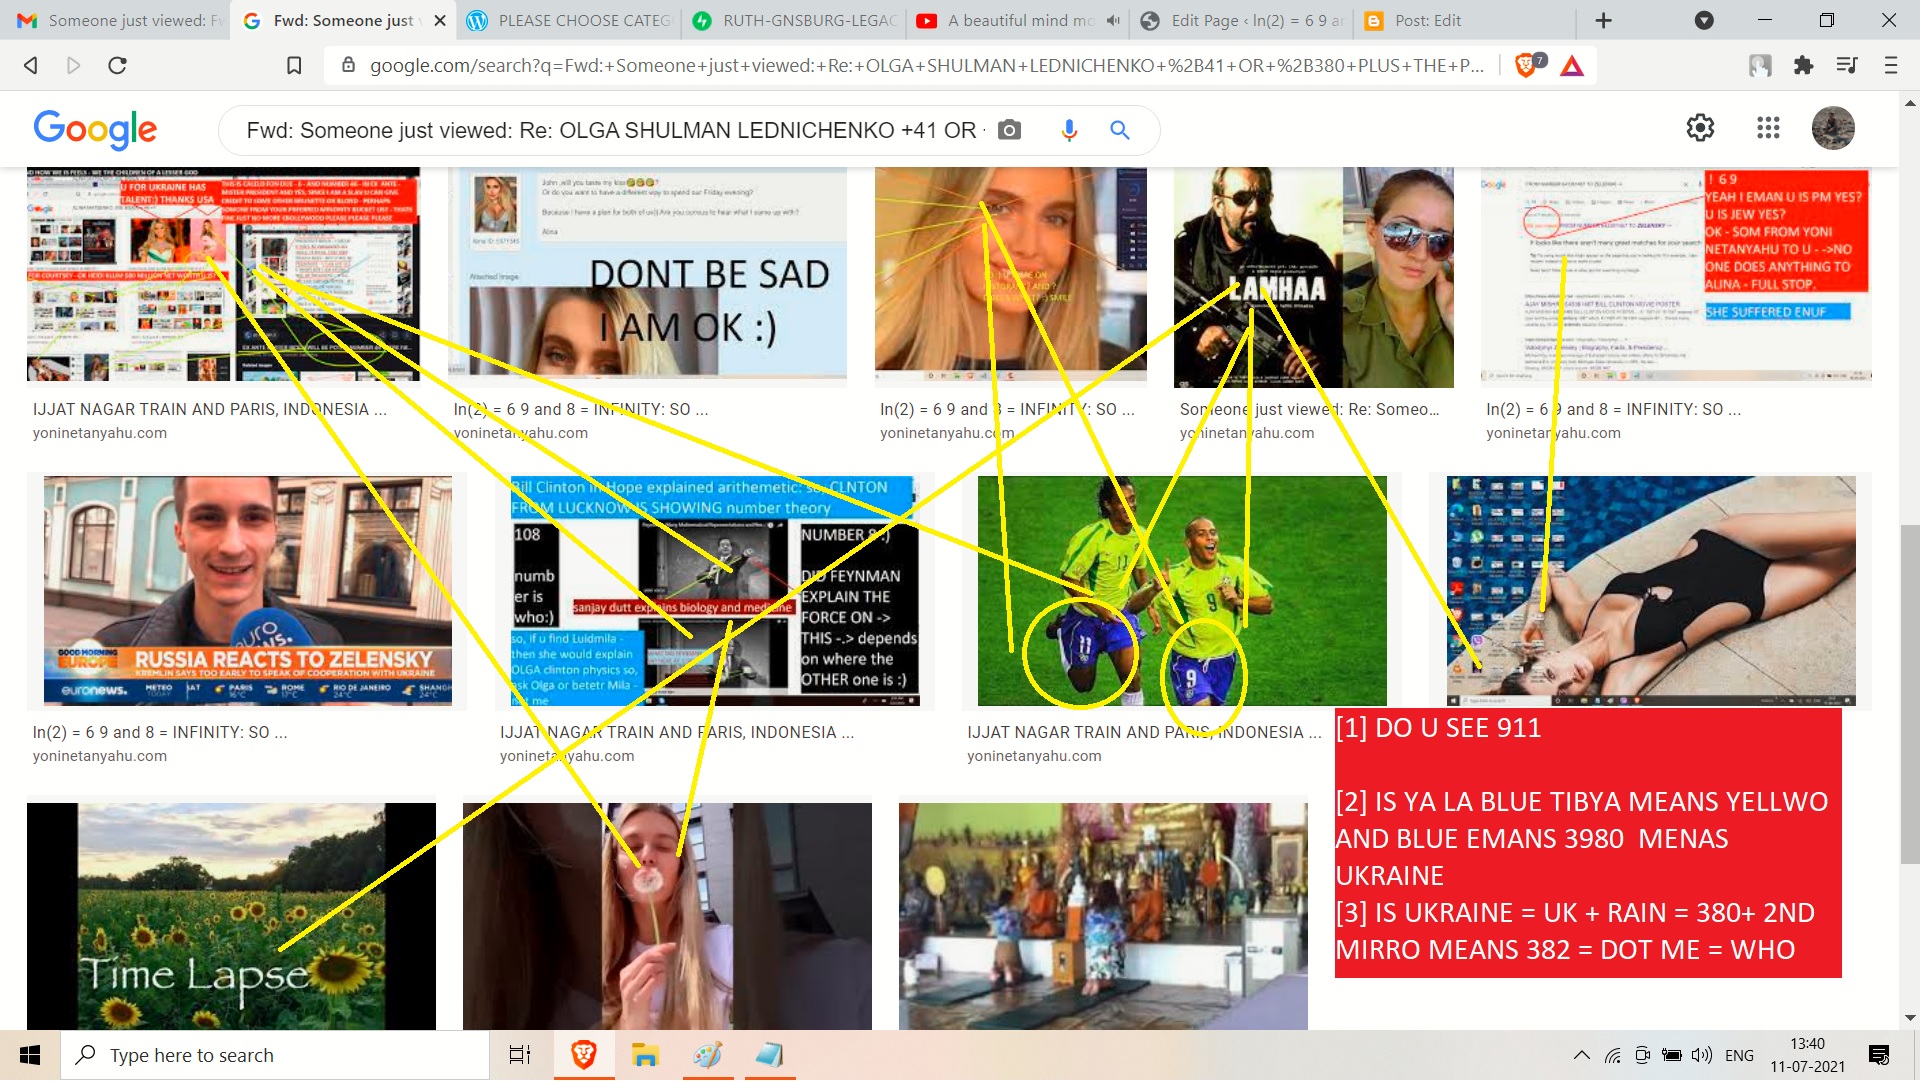 MISTER BIDEN - IS GHEIDKI KLUM STILL ALIVE ? OK ALINA IS - AND SONIA ISNT ANWYAY [1] DO U SEE 911 [2] IS YA LA BLUE TIBYA MEANS YELLWO AND BLUE EMANS 3980 MENAS UKRAINE [3] IS UKRAINE = UK + RAIN = 380+ 2ND MIRRO MEANS 382 = DOT ME = WHO [4] TIME LASE DES IS SHWO YELOW SUN FLOWER ?MISHRA MATSENKO BDIEN - 911 - AND NUMERS ASSOCAITED WITH 911